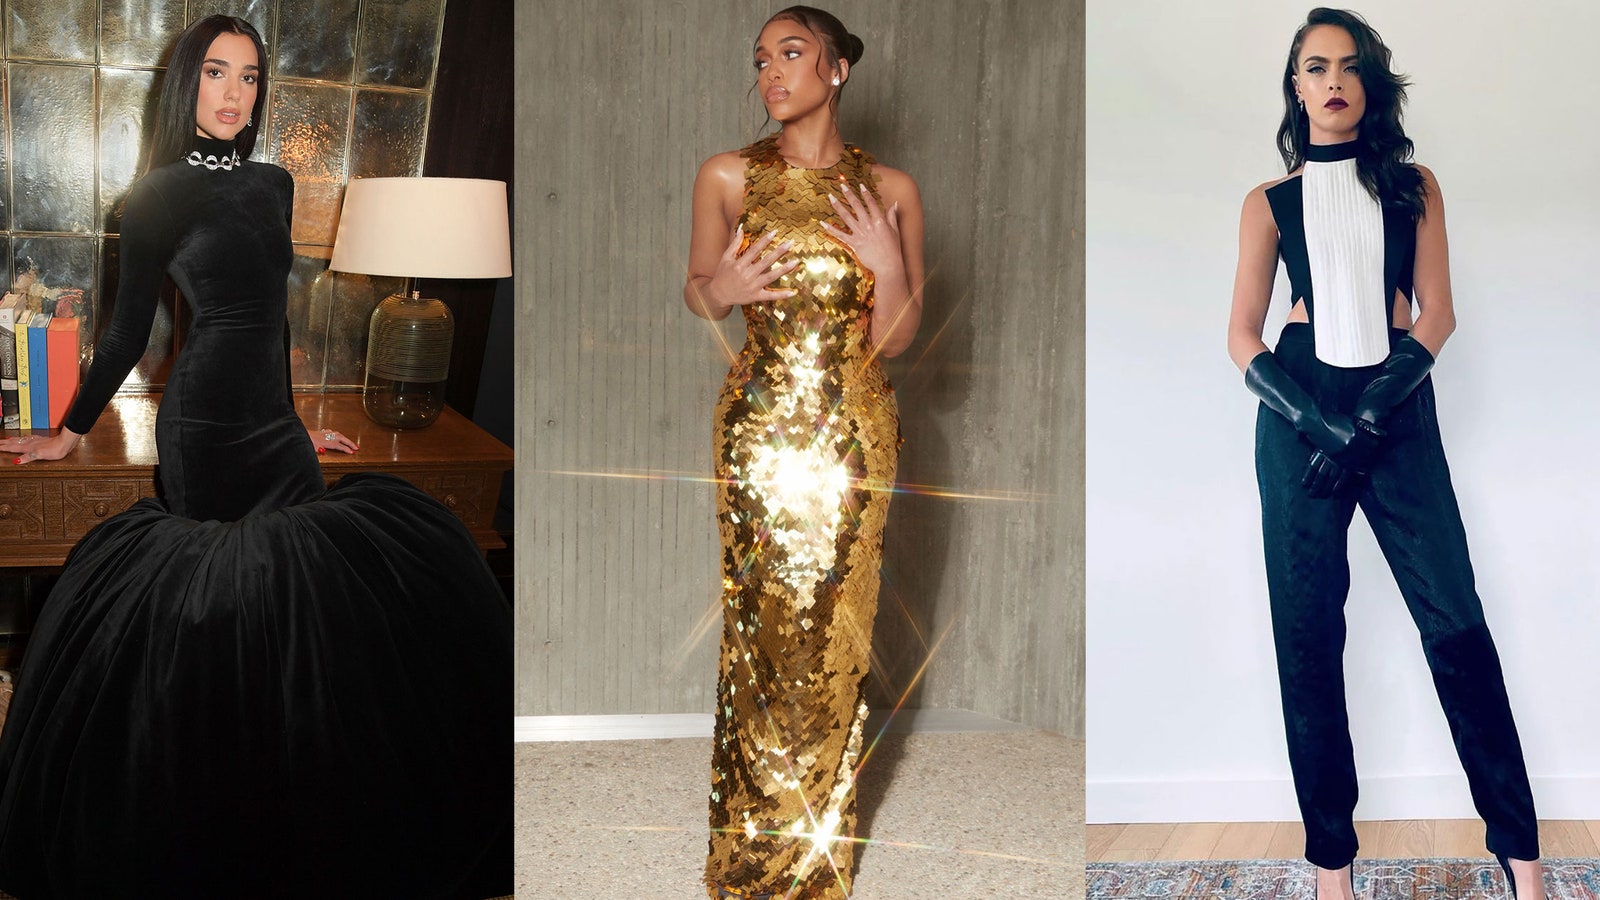 This Week, the Best Dressed Stars Found Their Signature Look